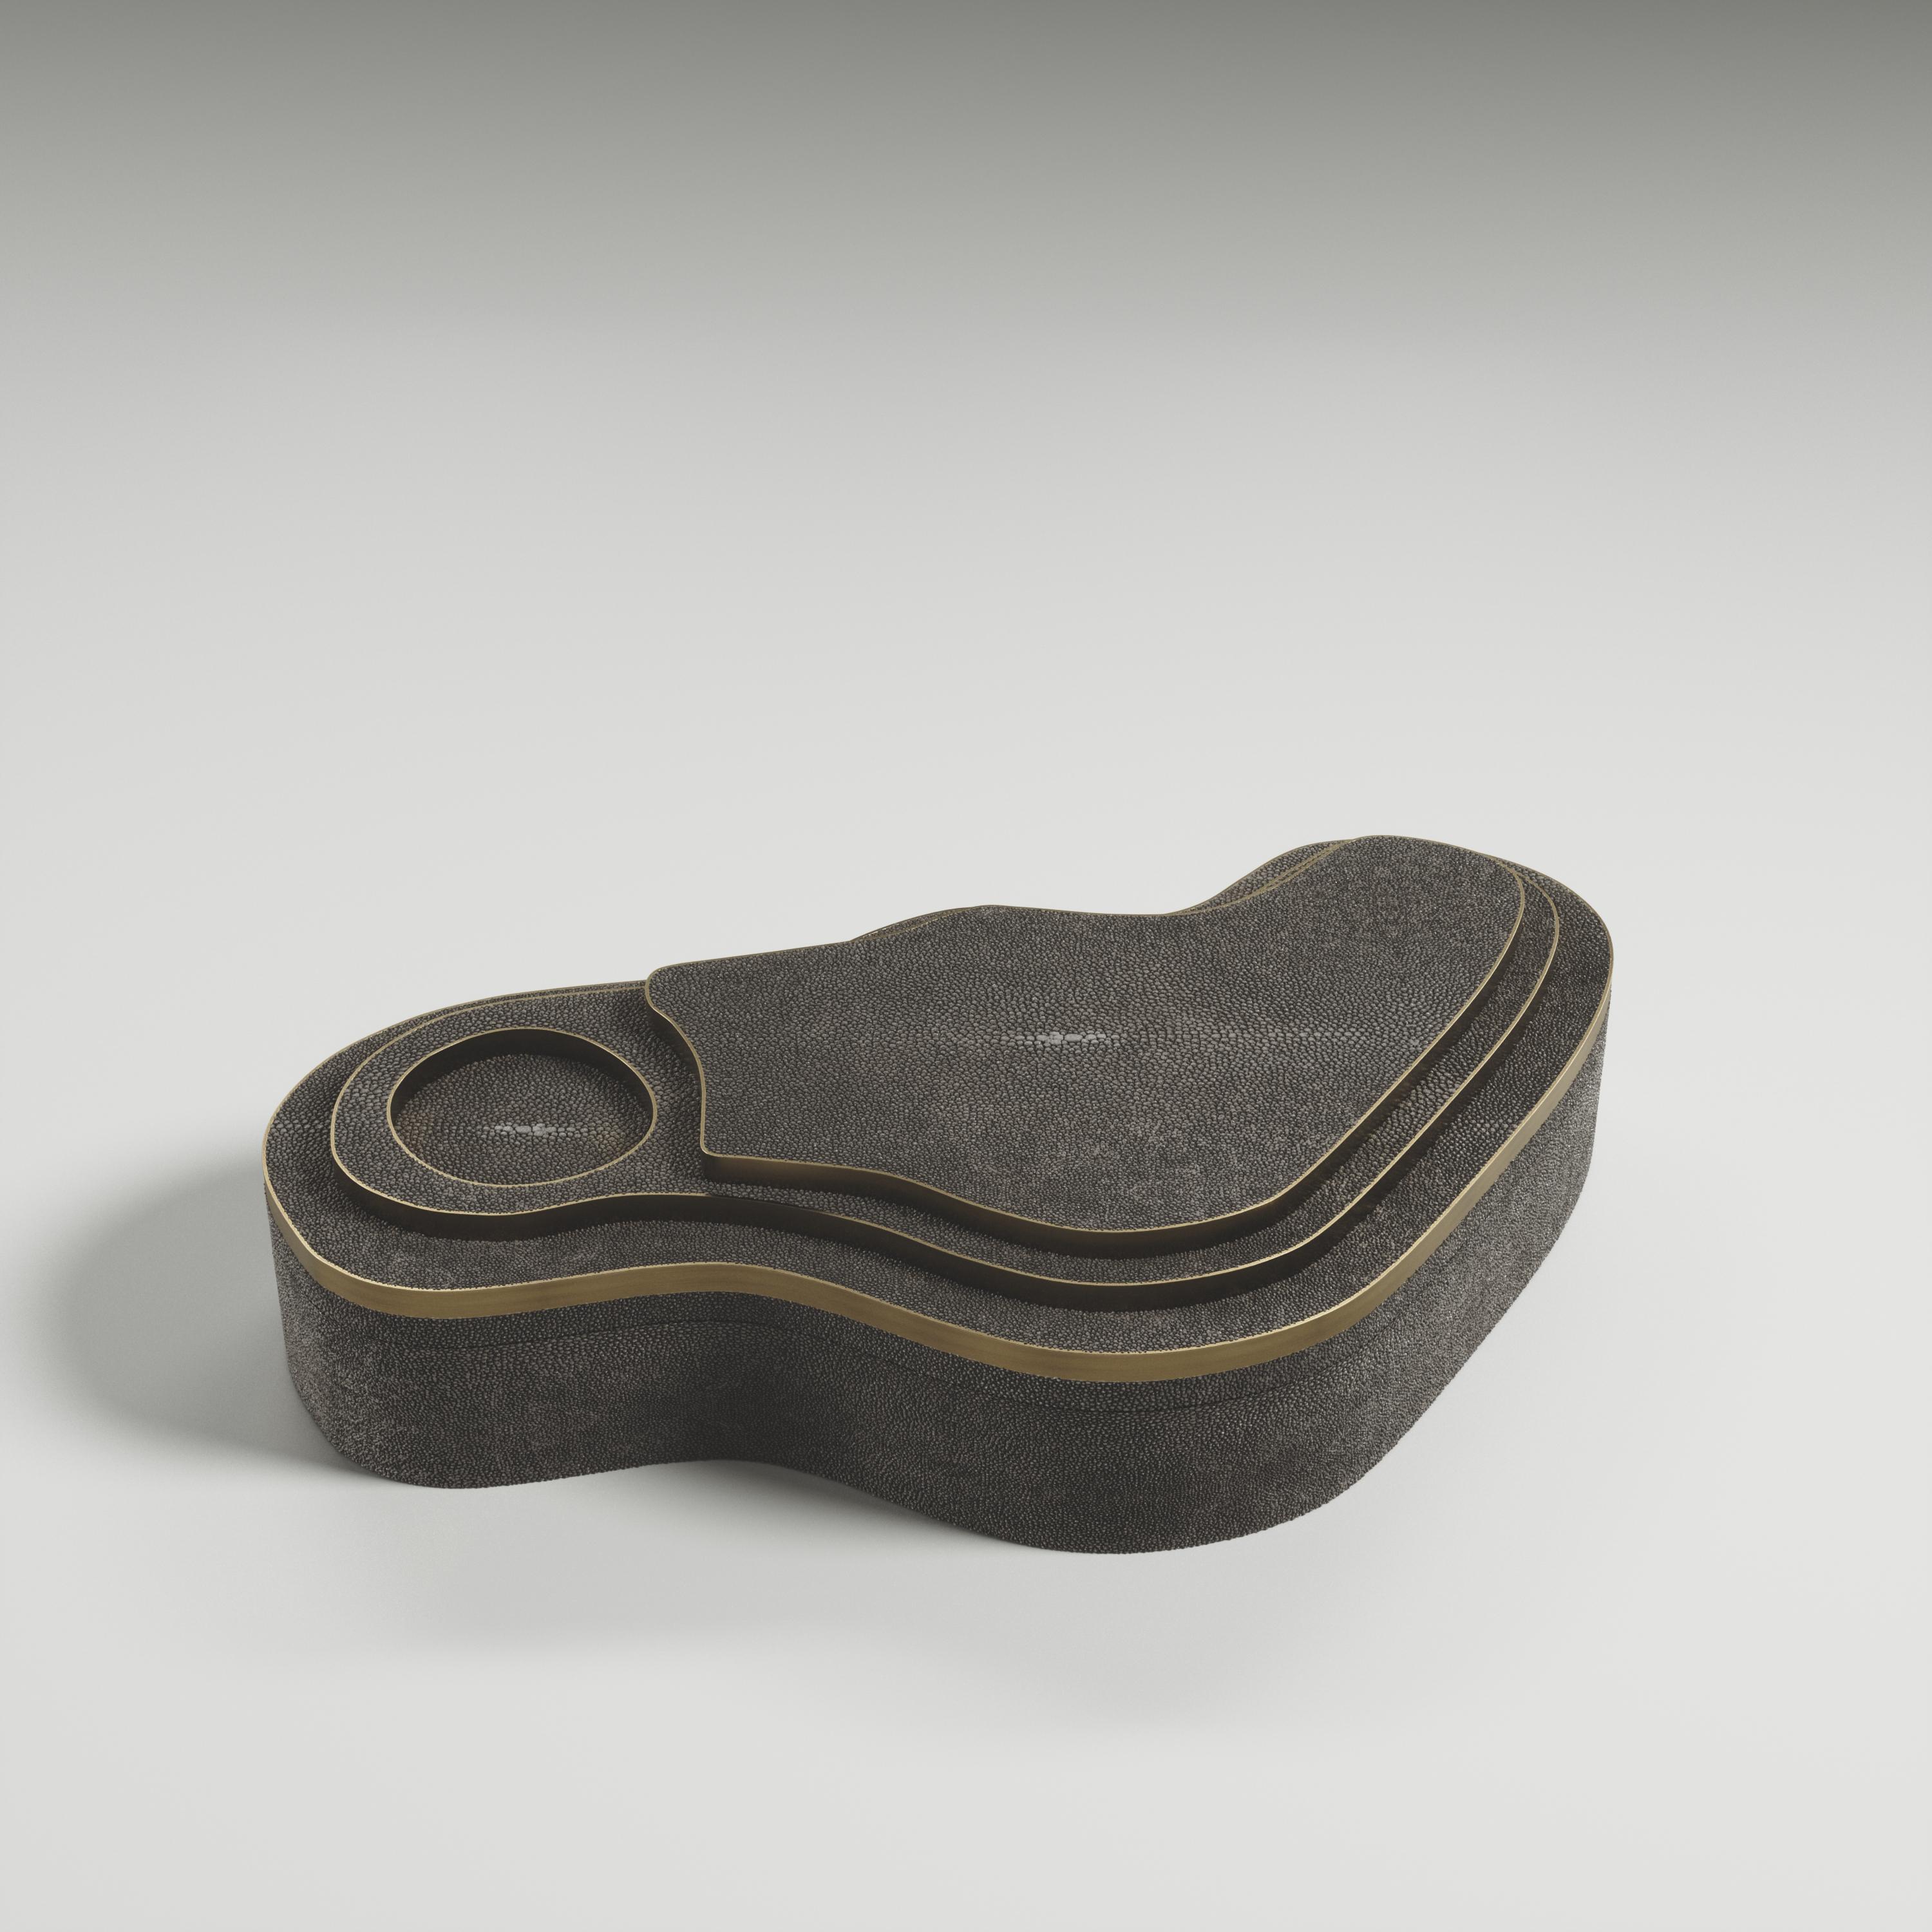 The Mask Box with relief by Kifu Paris is a versatile and organic piece. The amorphous top and base are inlaid in a mixture of coal black shagreen and bronze-patina brass. This piece is designed by Kifu Augousti the daughter of Ria and Yiouri